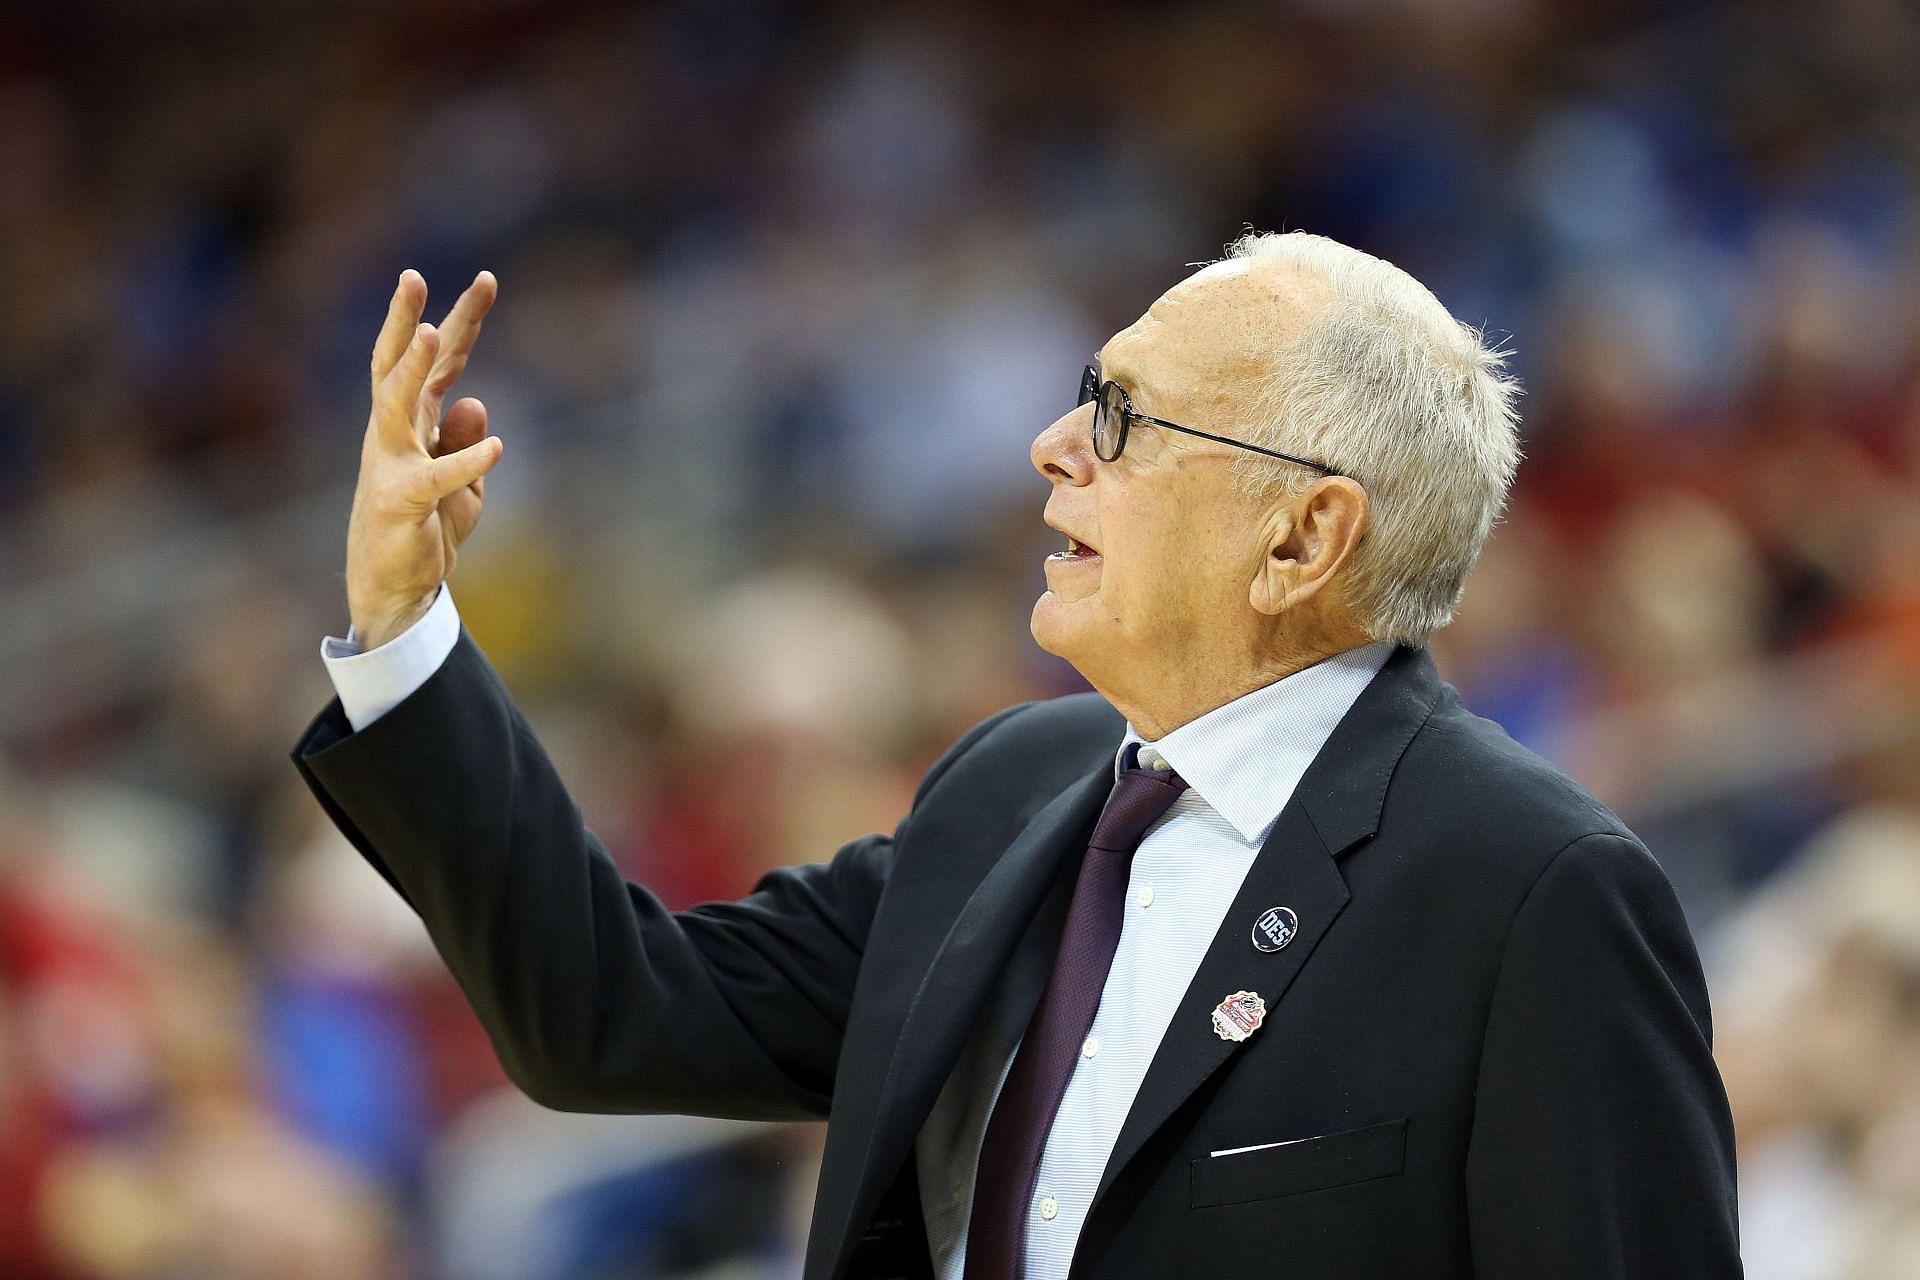 Washington basketball coaching staff 2023 How Larry Brown impacts the